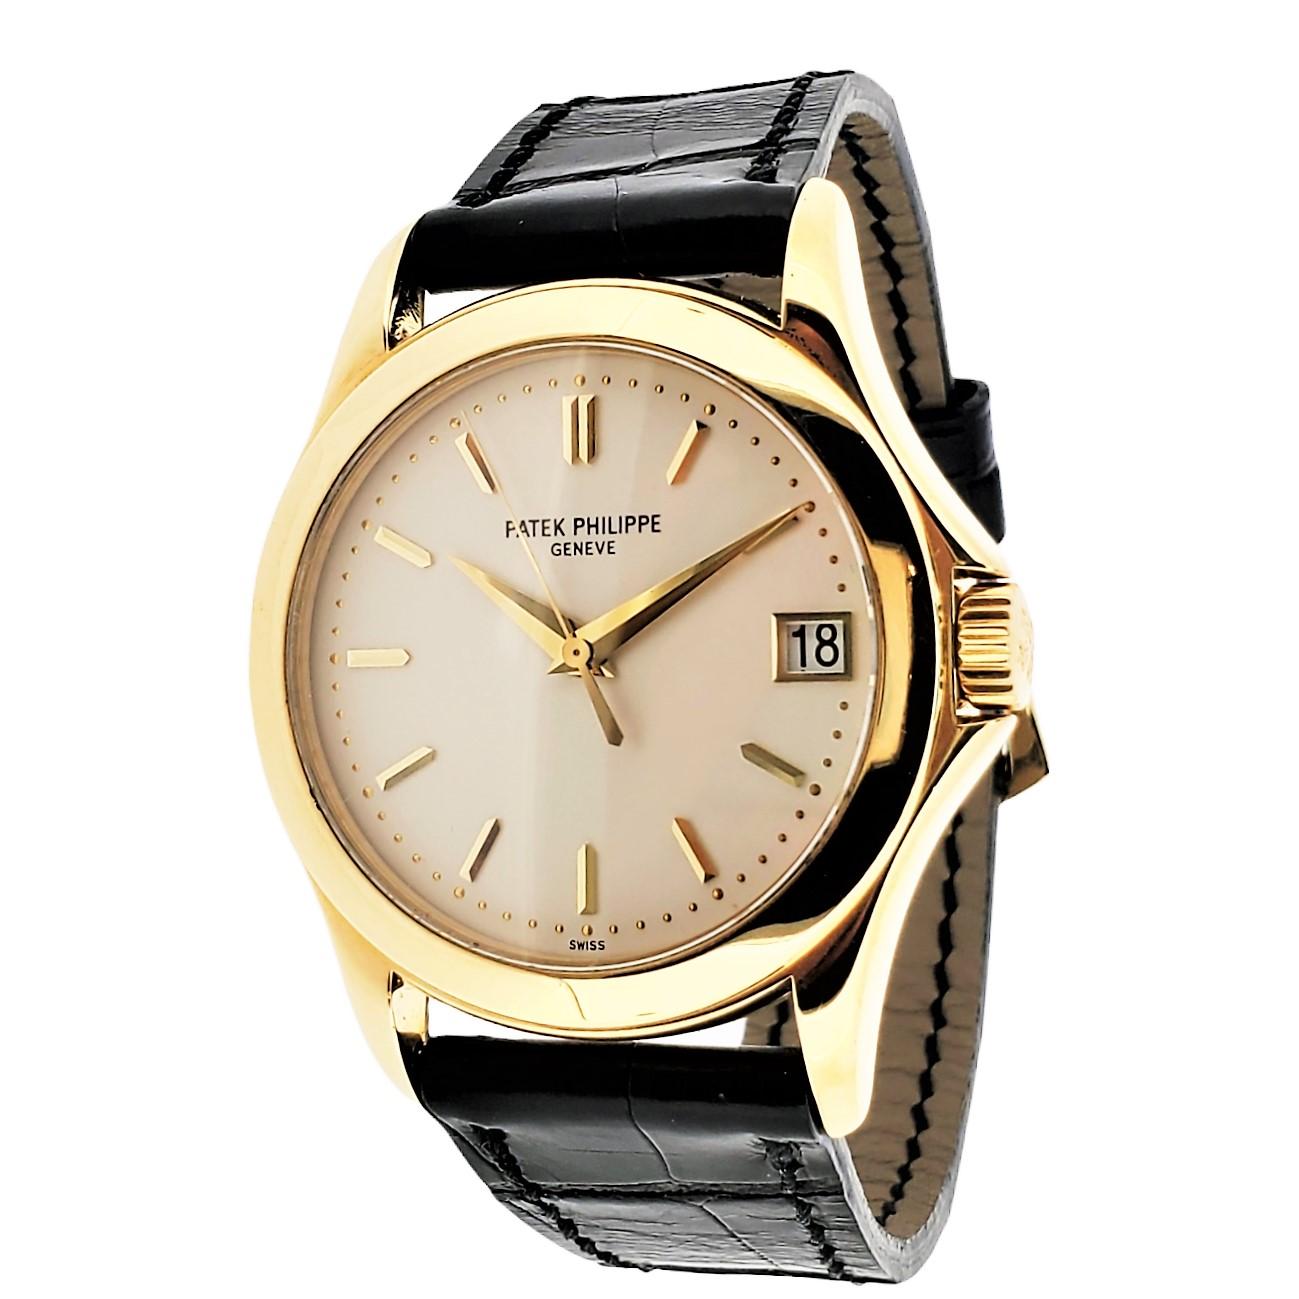 Introduction:
Patek Philippe 5107J 37mm Automatic Calatrava watch, made in 18K Yellow gold with 315 SC caliber movement #3252717, Case #4233479.  The watch is accompanied with an Patek Philippe strap and Patek buckle.  further accompanied with an